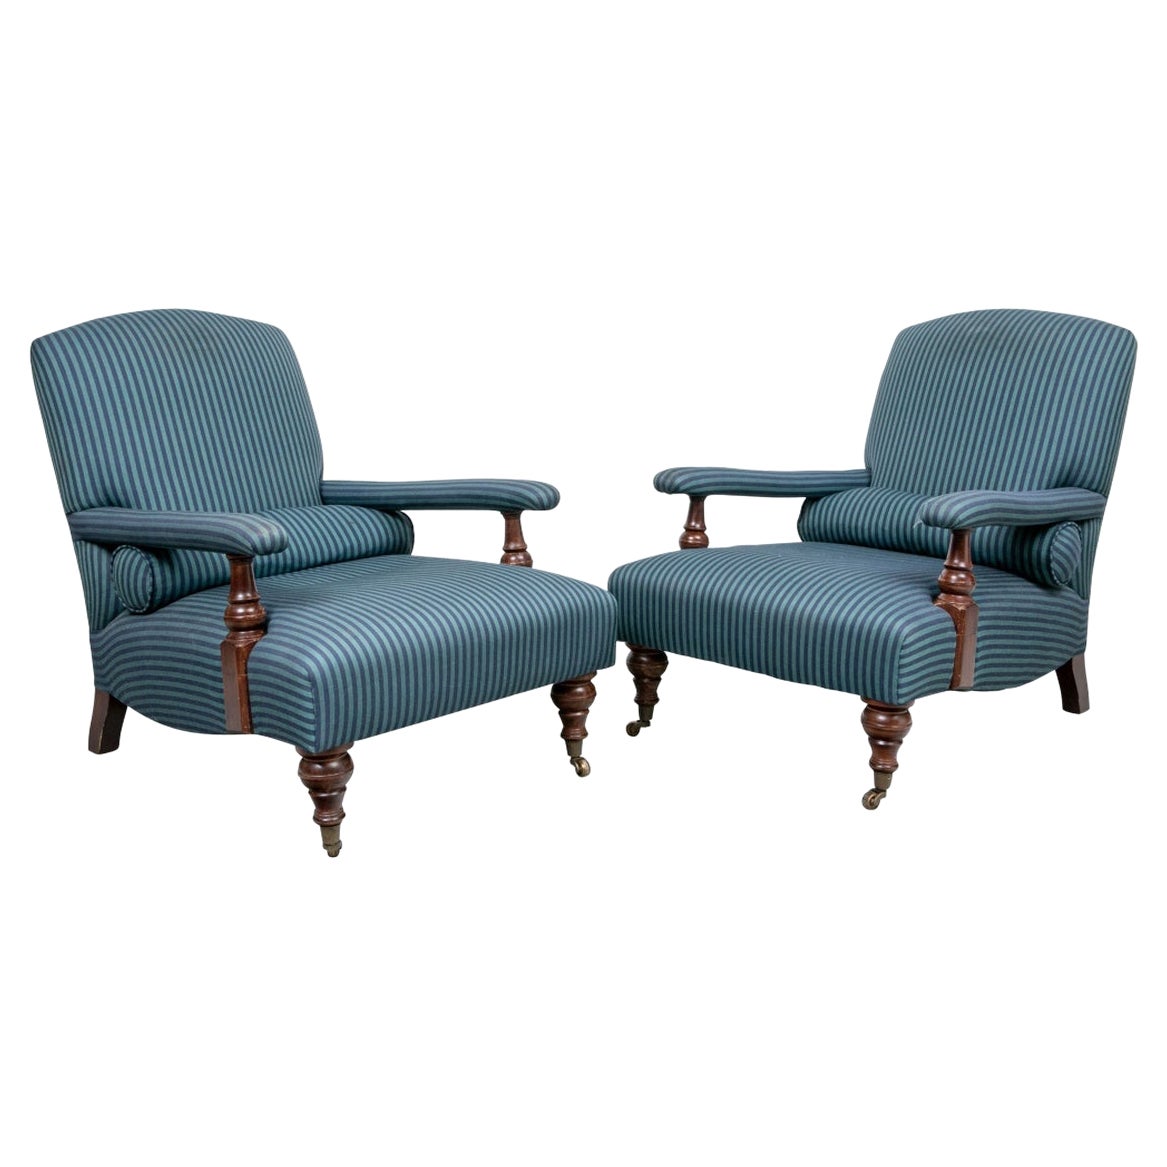 Pair of Vintage Edwardian Chairs by George Smith